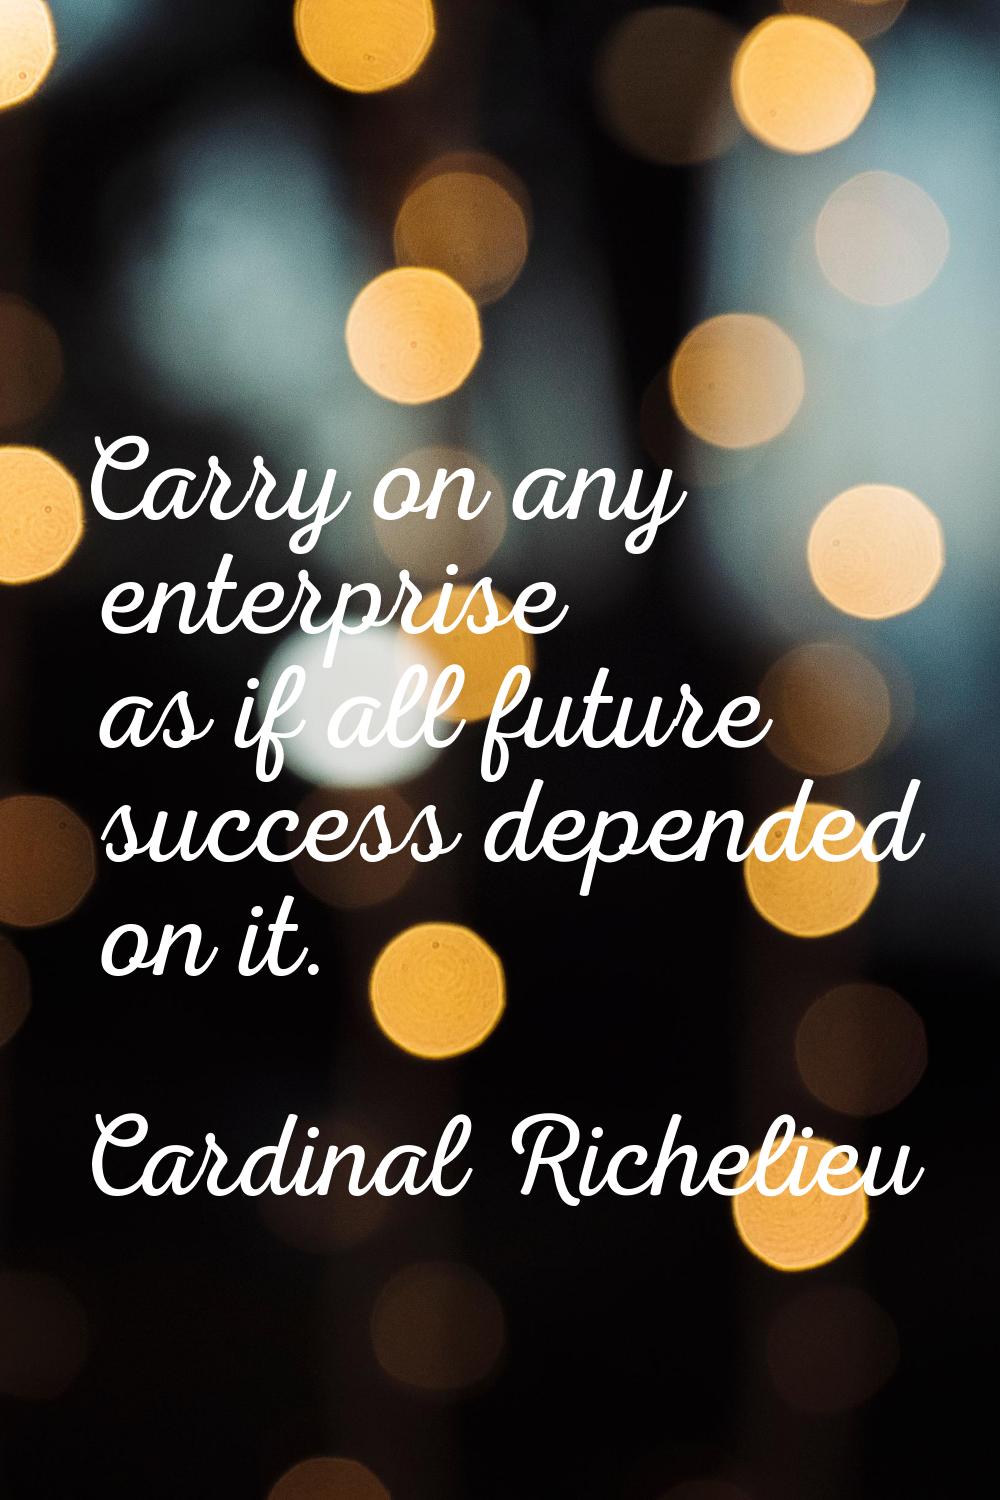 Carry on any enterprise as if all future success depended on it.